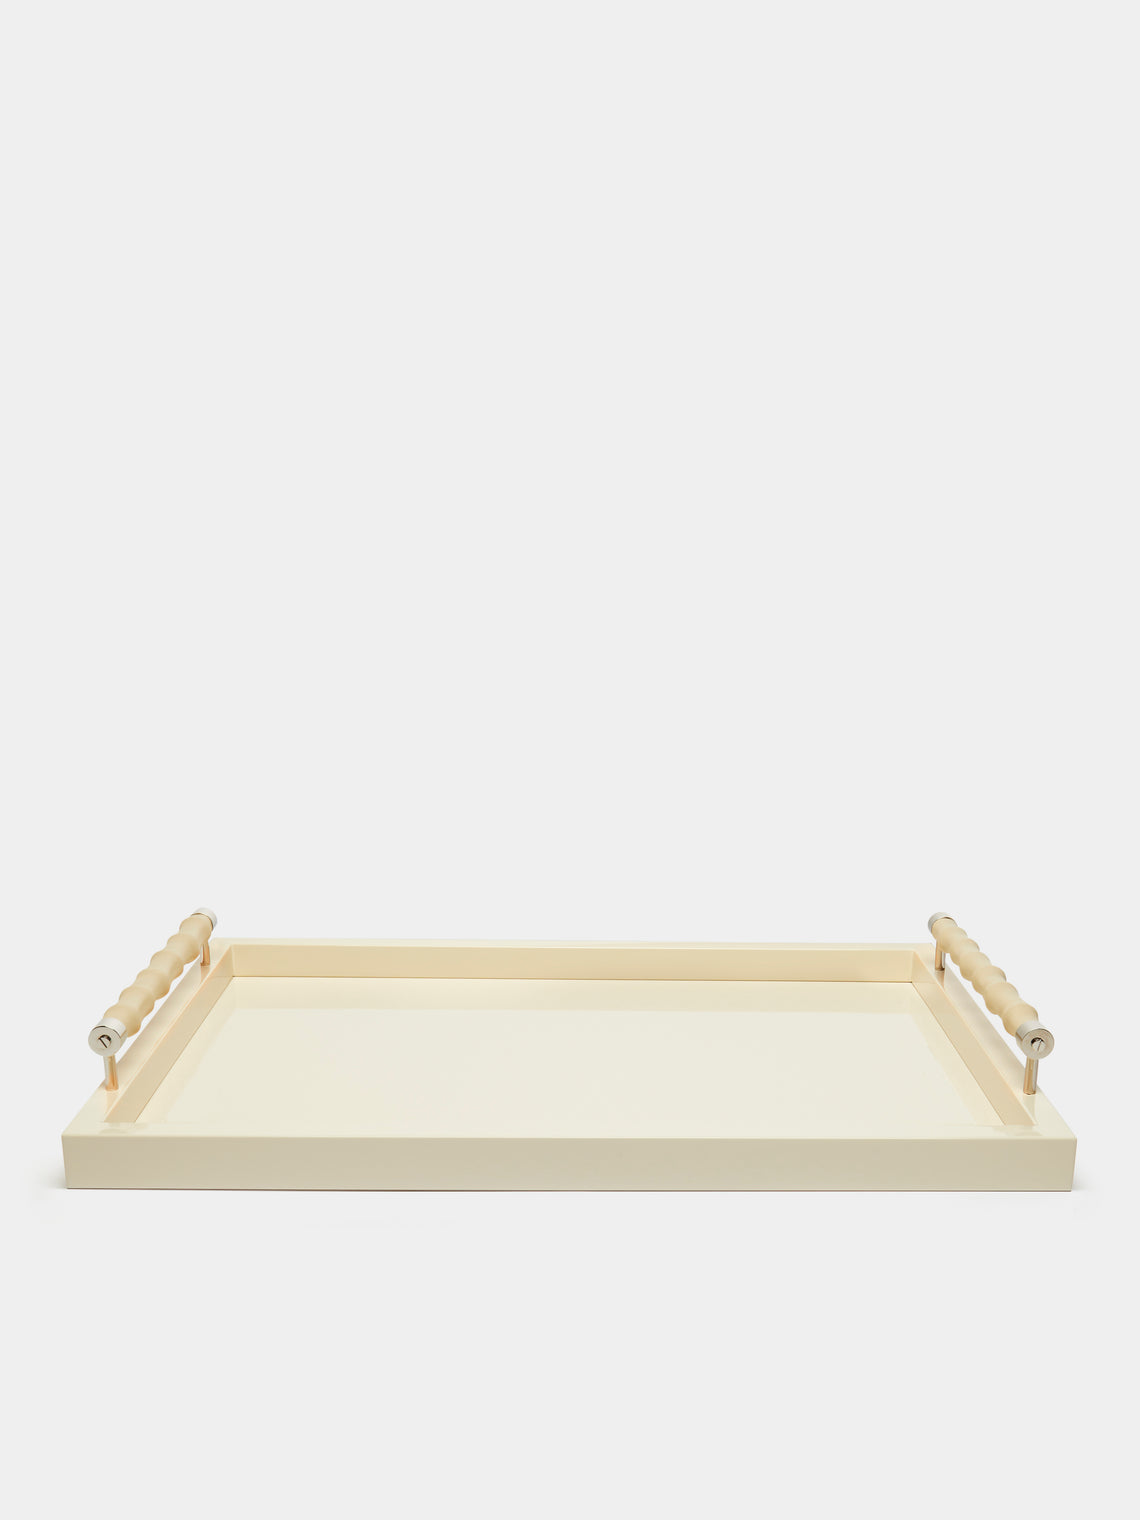 Riviere - Lacquered Leather Tray - Cream - ABASK - 